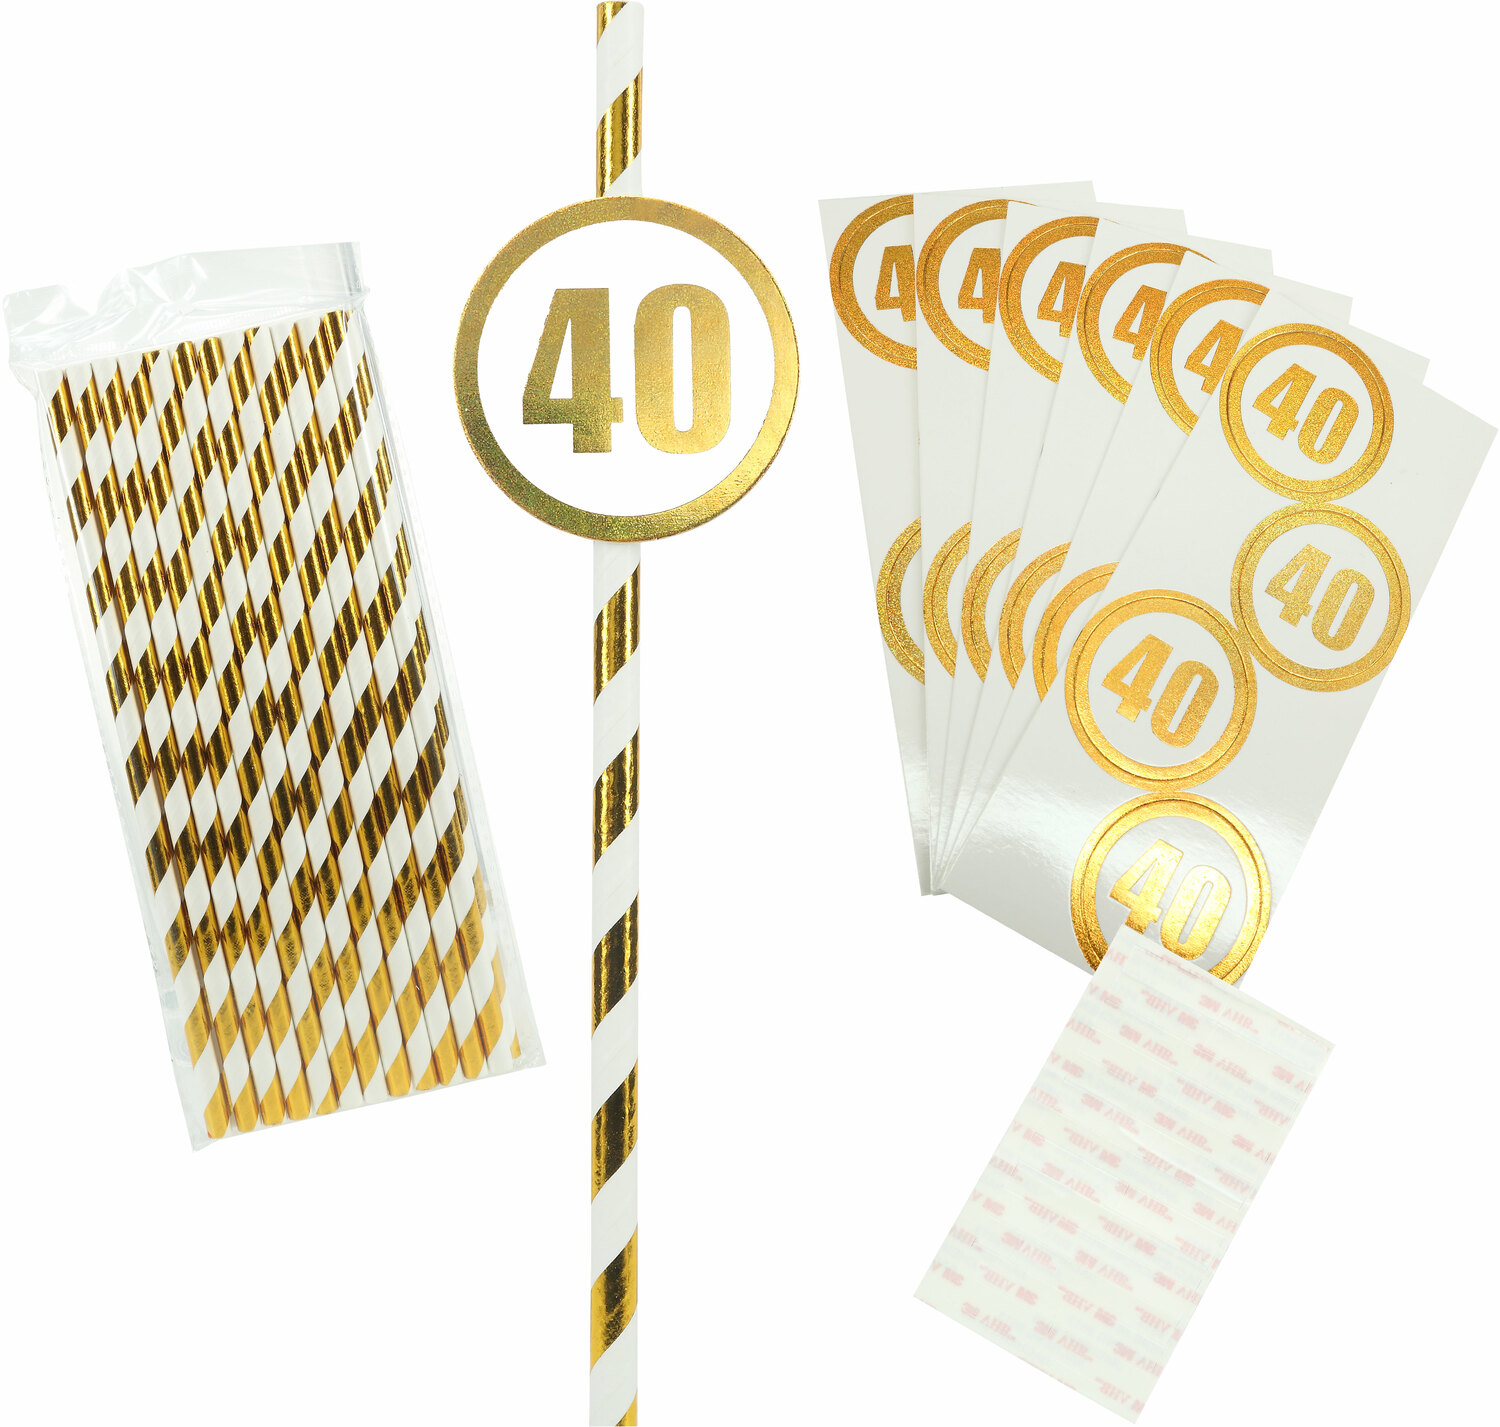 40 by Salty Celebration - 40 - 24 Pack Party Straws